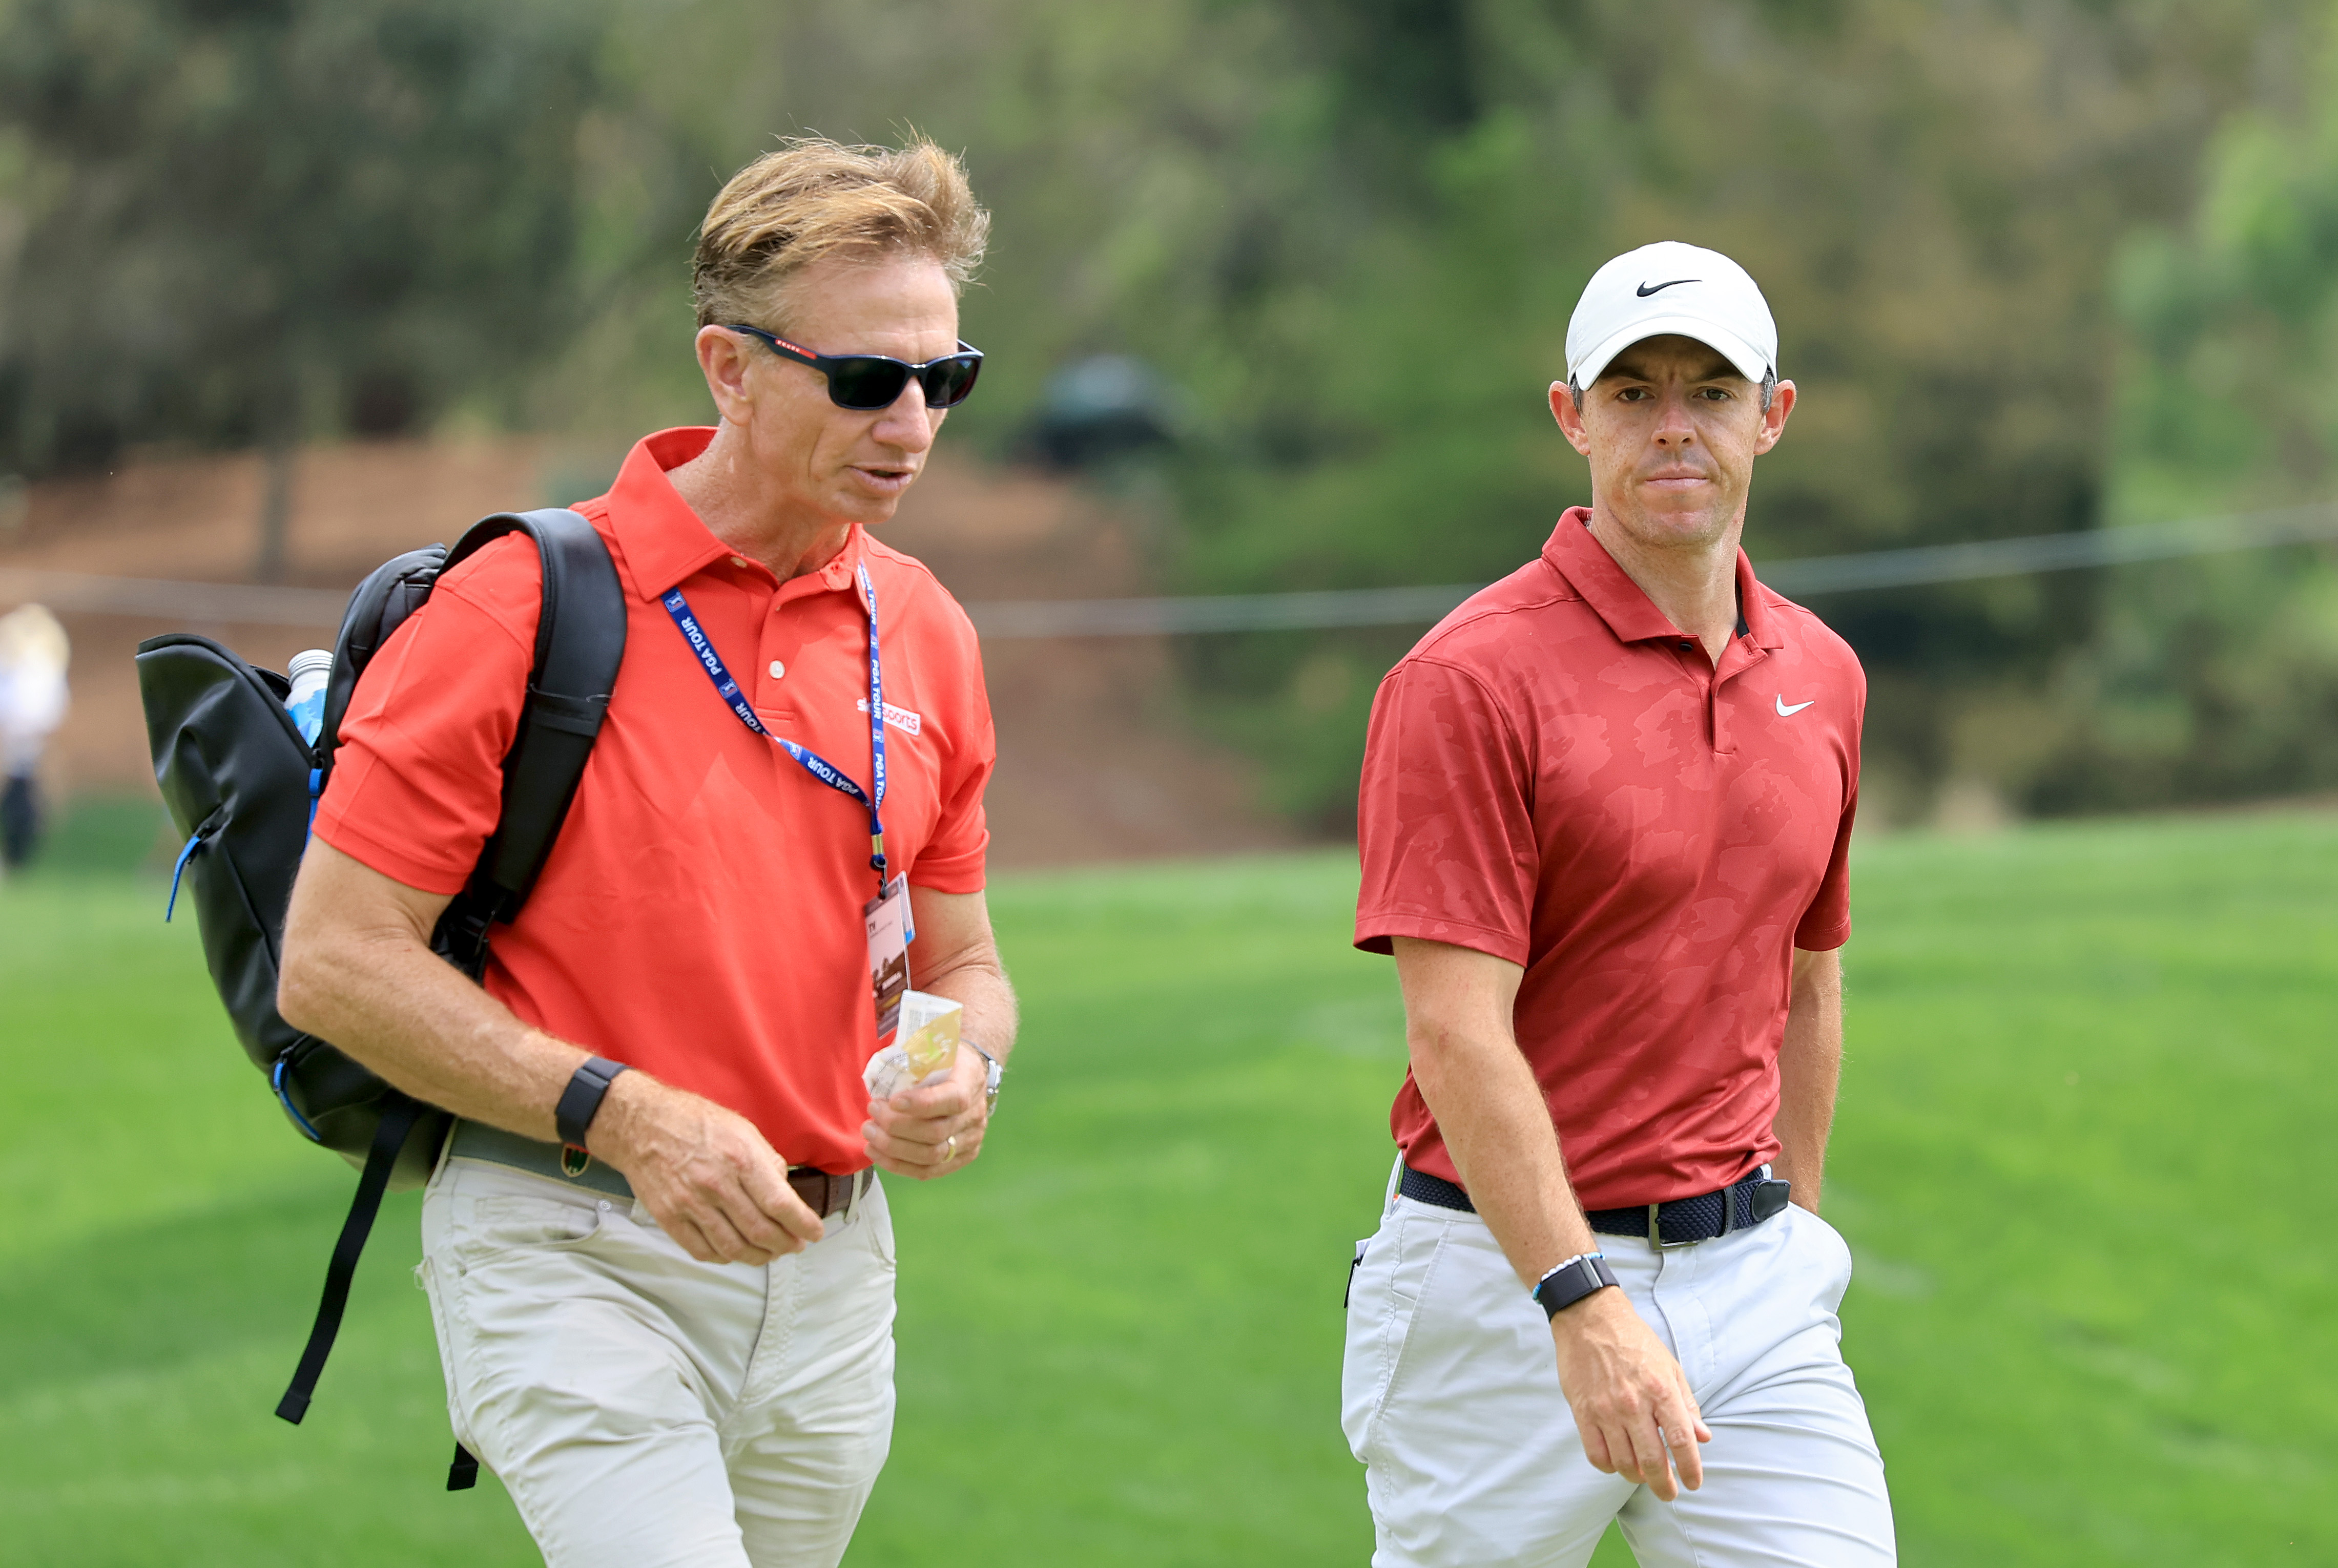 Reports More broadcast changes as Brad Faxon, Smylie Kaufman in and Kathryn Tappen out at NBC/Golf Channel Golf News and Tour Information GolfDigest